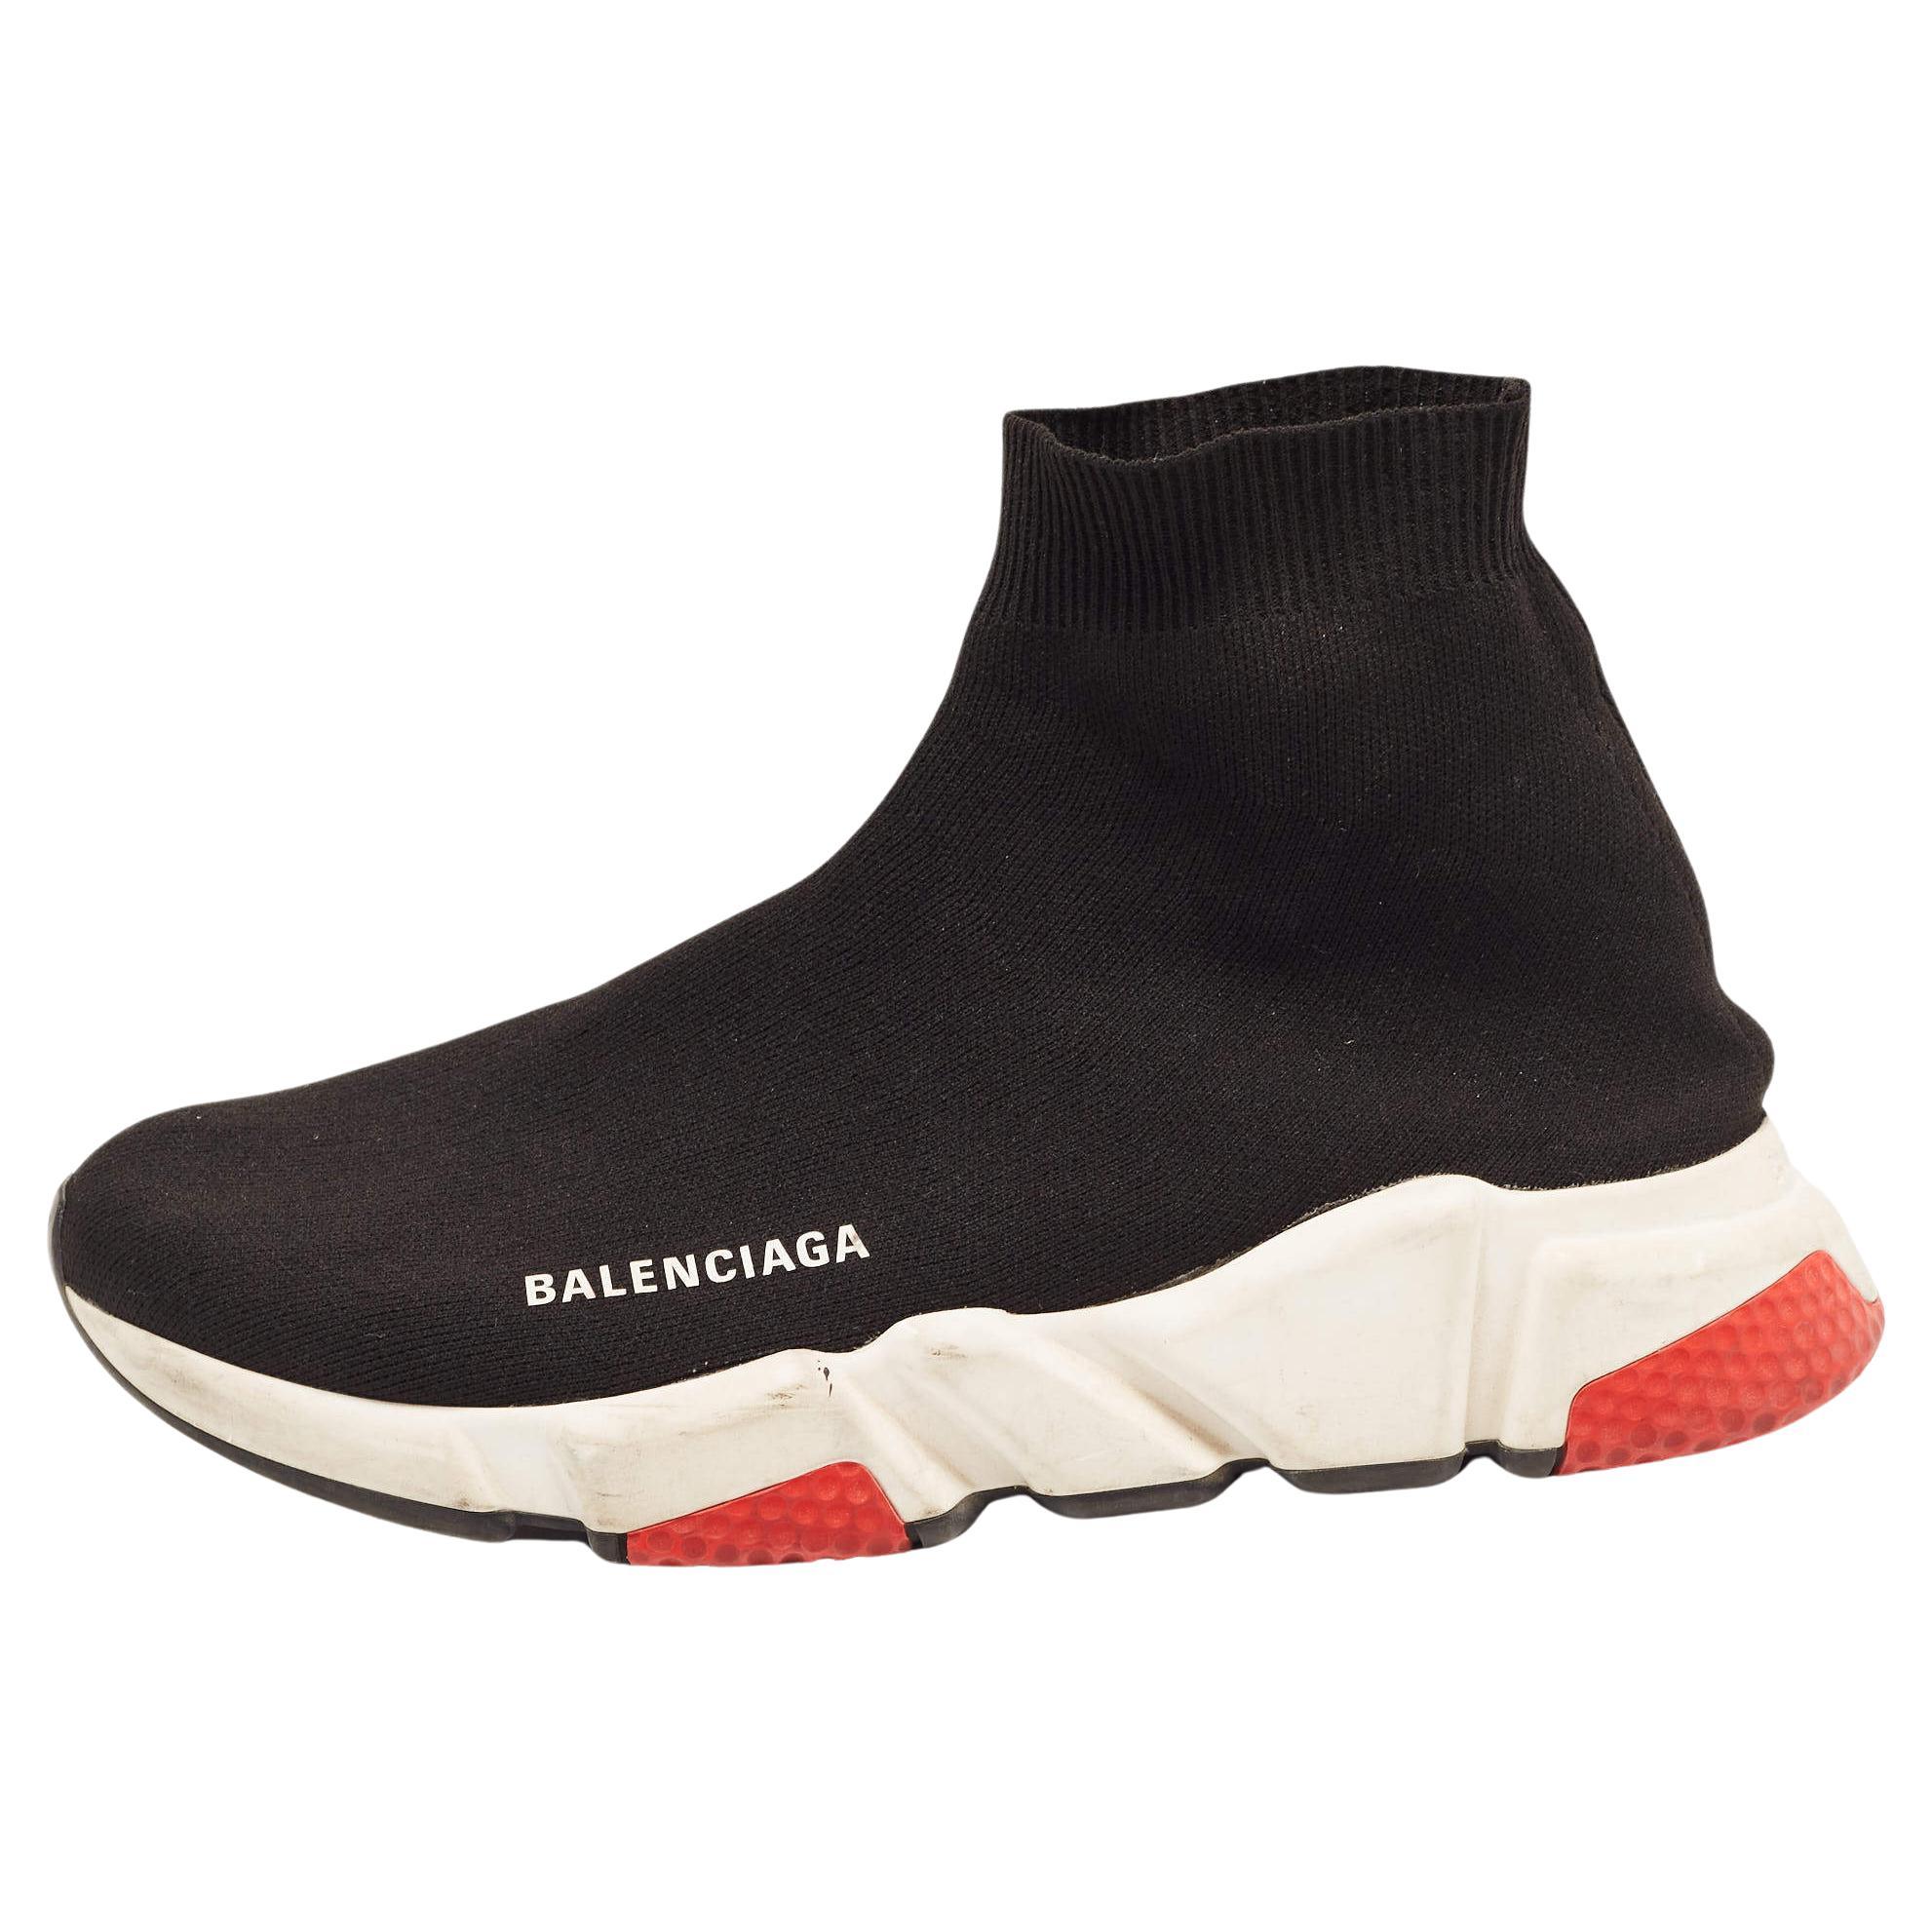 Balenciaga Black Knit Fabric Speed Trainer High Top Sneakers Size 39